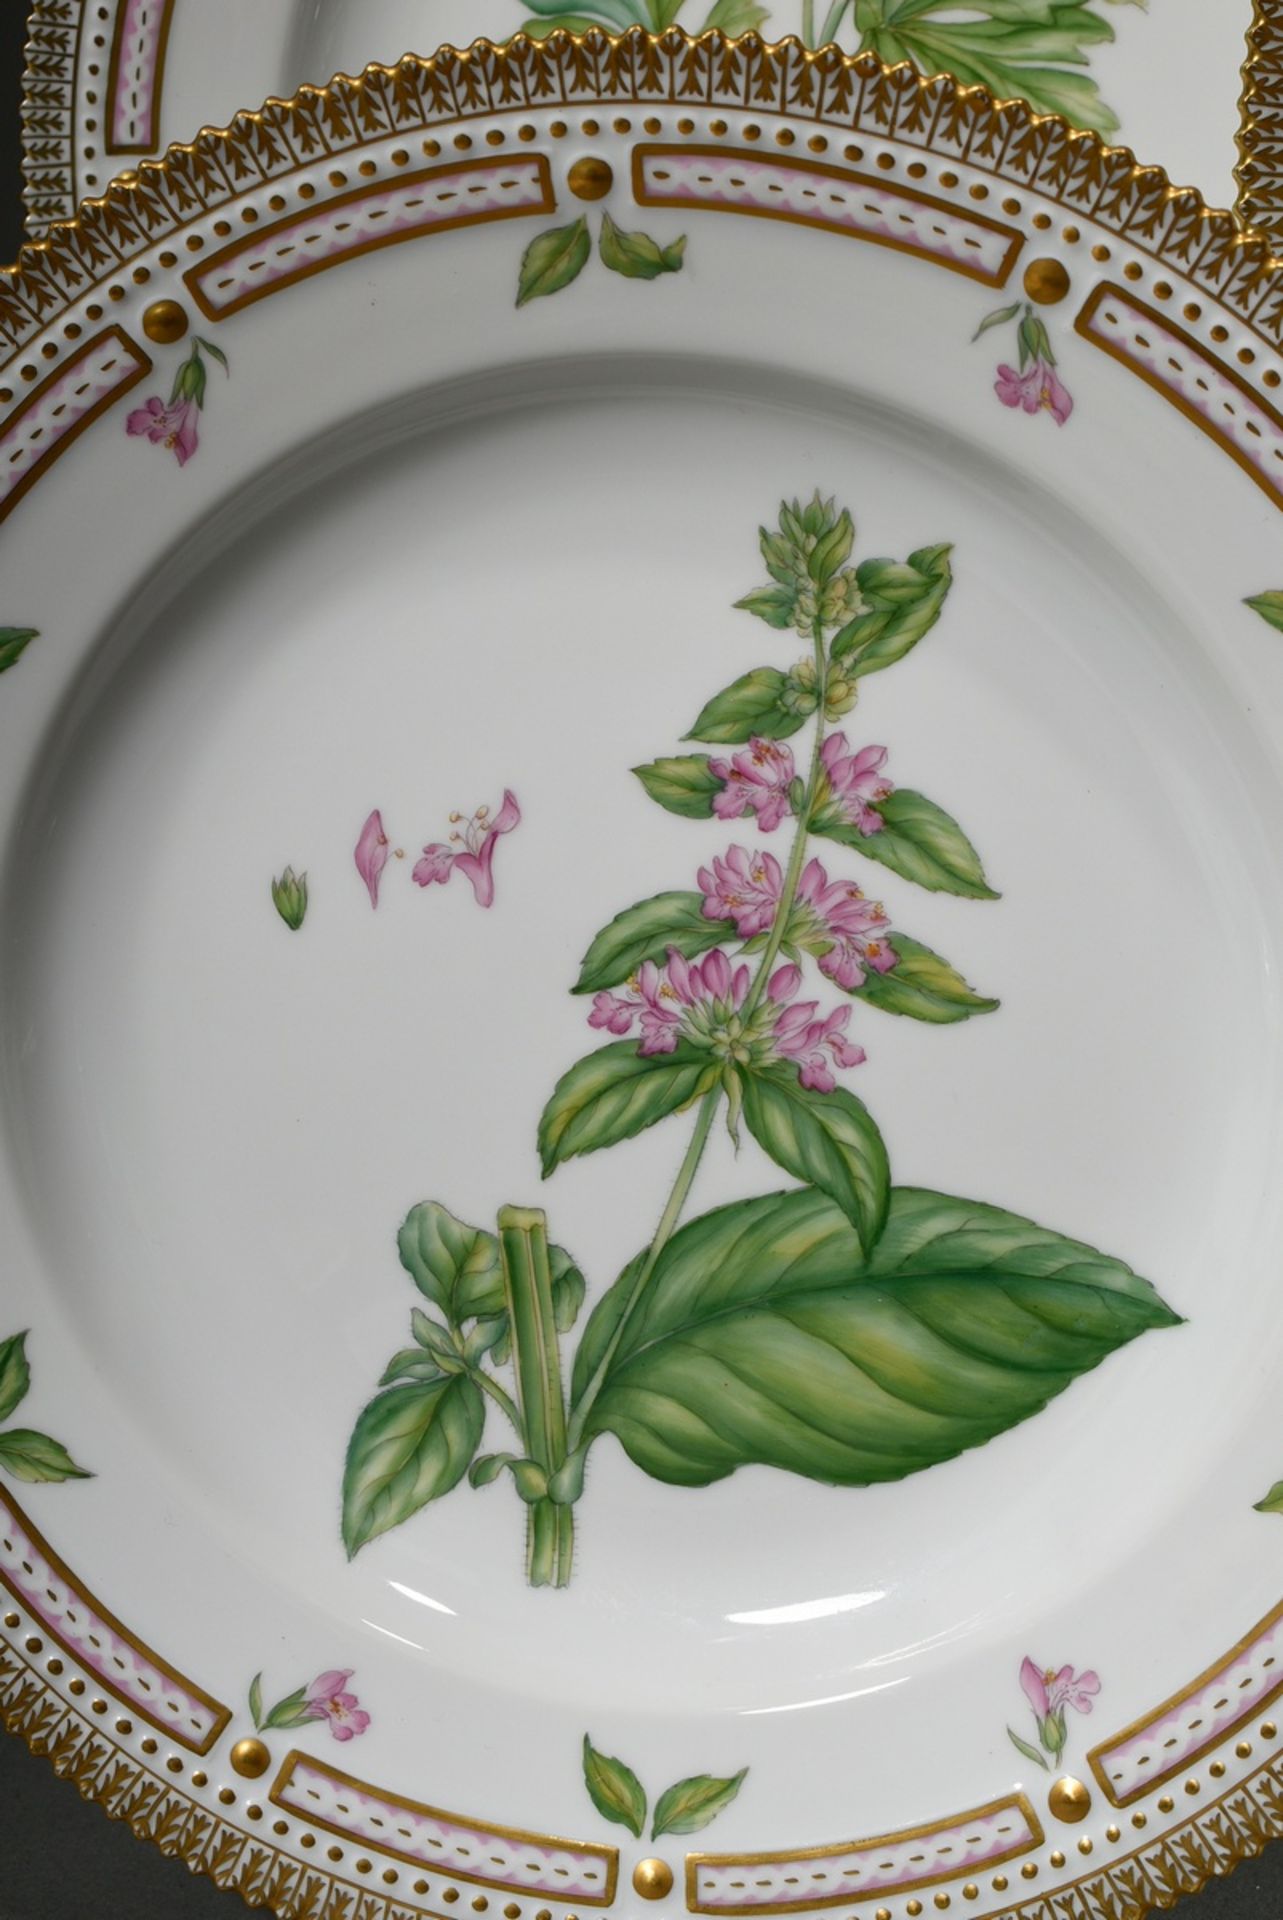 6 Royal Copenhagen "Flora Danica" dinner plates with polychrome painting in the mirror and gold dec - Image 5 of 15